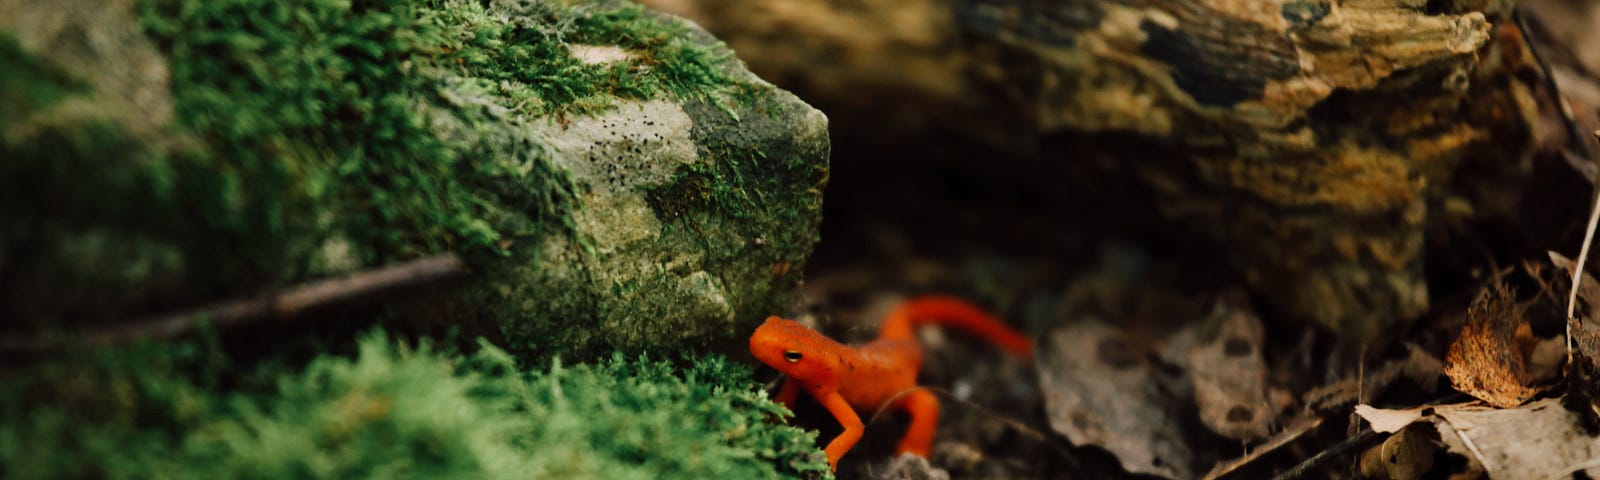 close up color photograph of a tiny orange amphibian on a moss covered rock